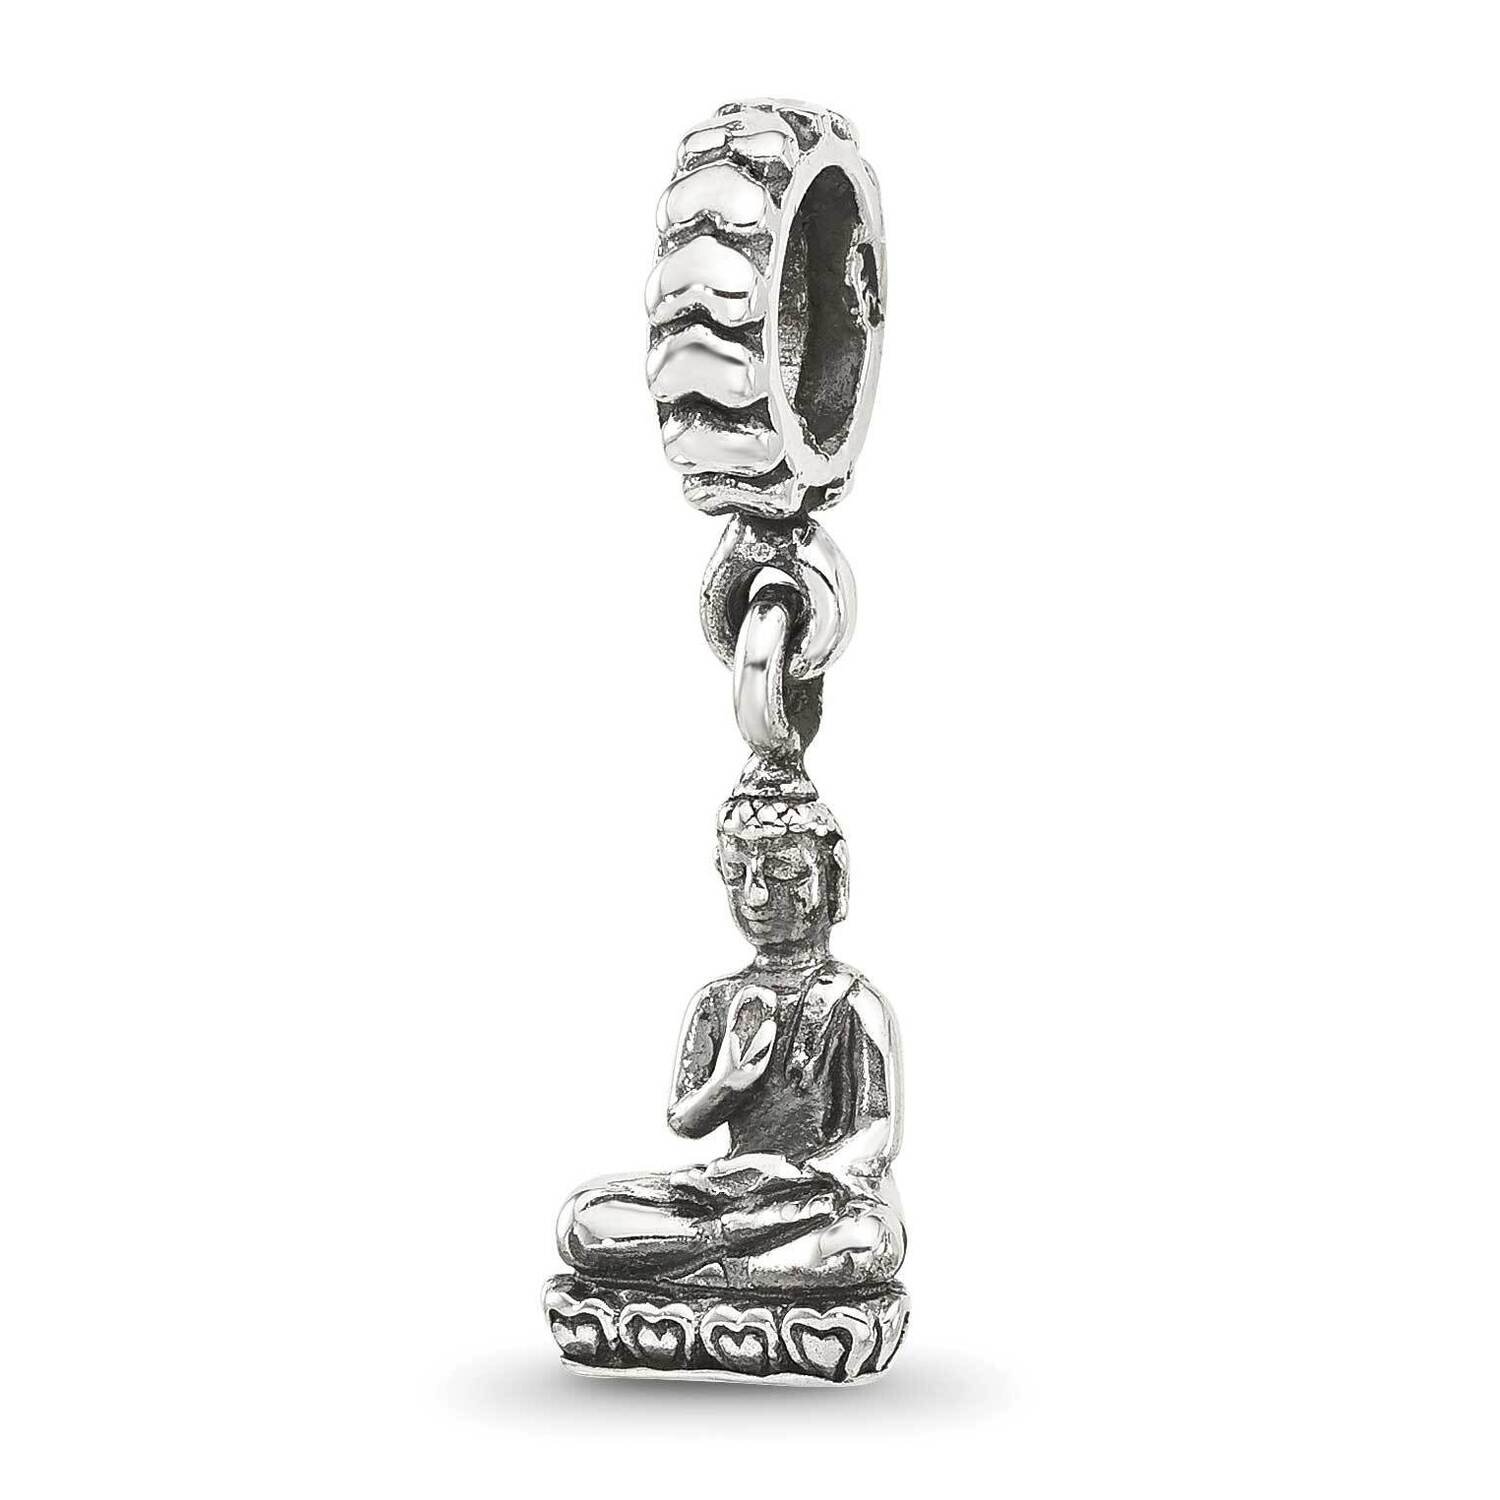 Antiqued Budda Dangle Bead Sterling Silver QRS4359